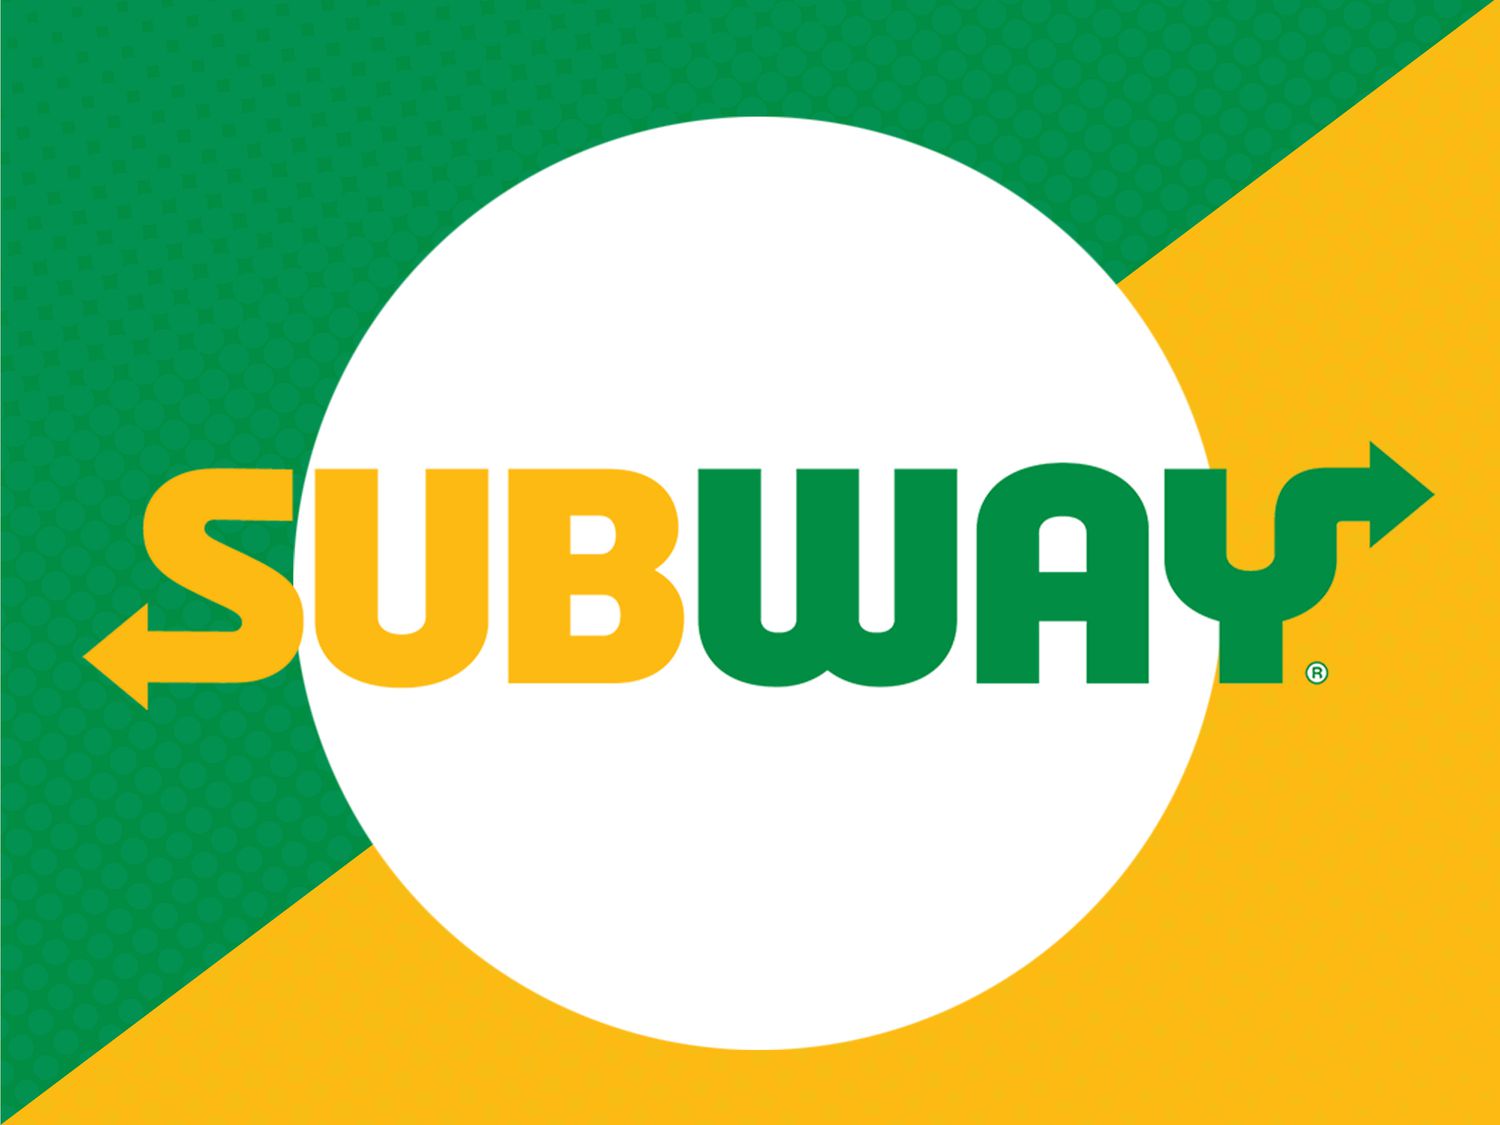 Subway: Substantial Roles in the Franchise Business